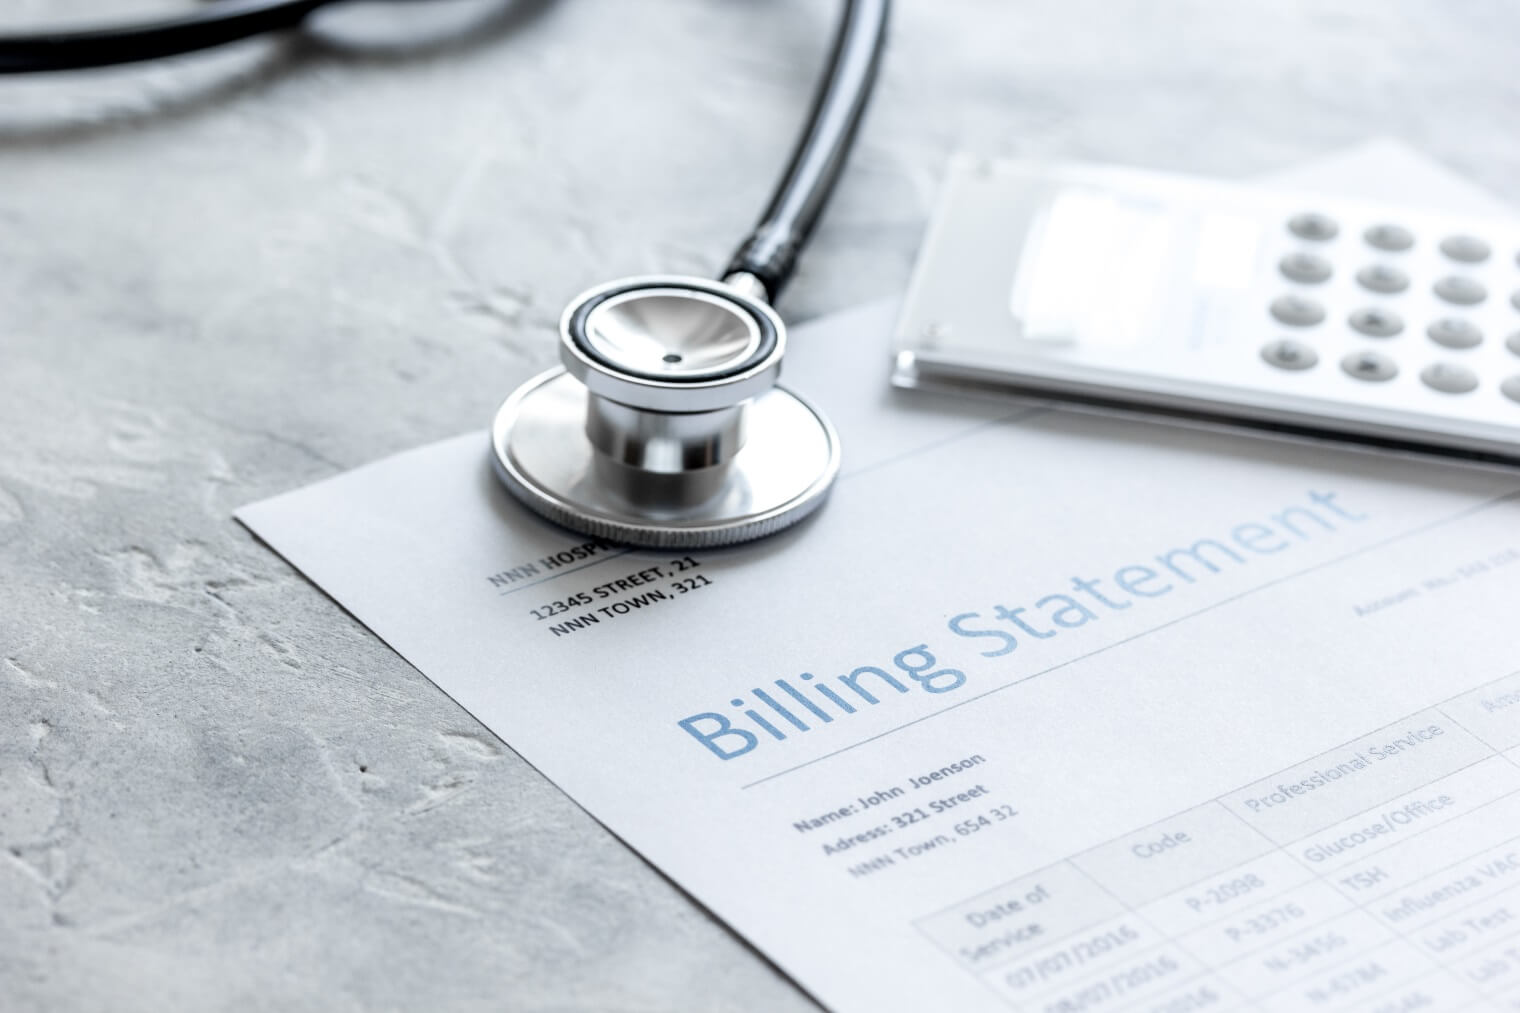 stethoscope rests on a billing statement 